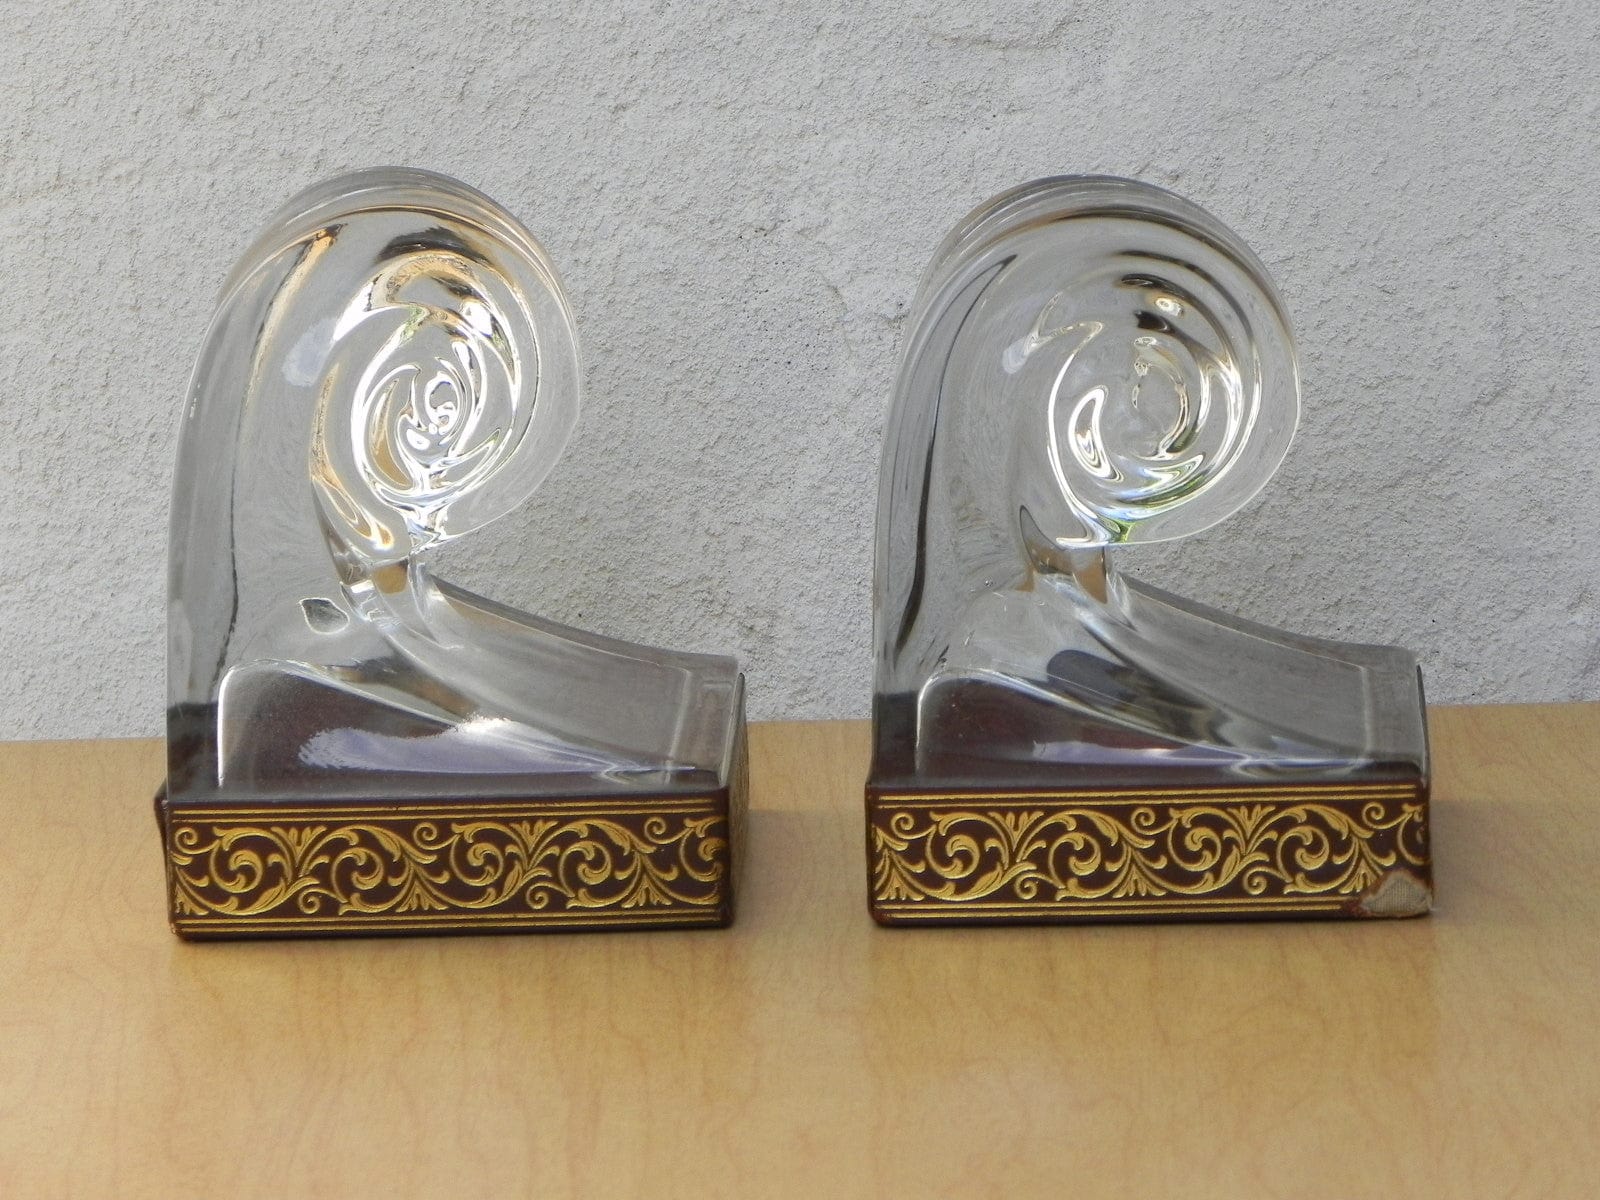 I Like Mike's Mid-Century Modern Accessories Glass Scroll Bookends With Good Embossed Leather Trim